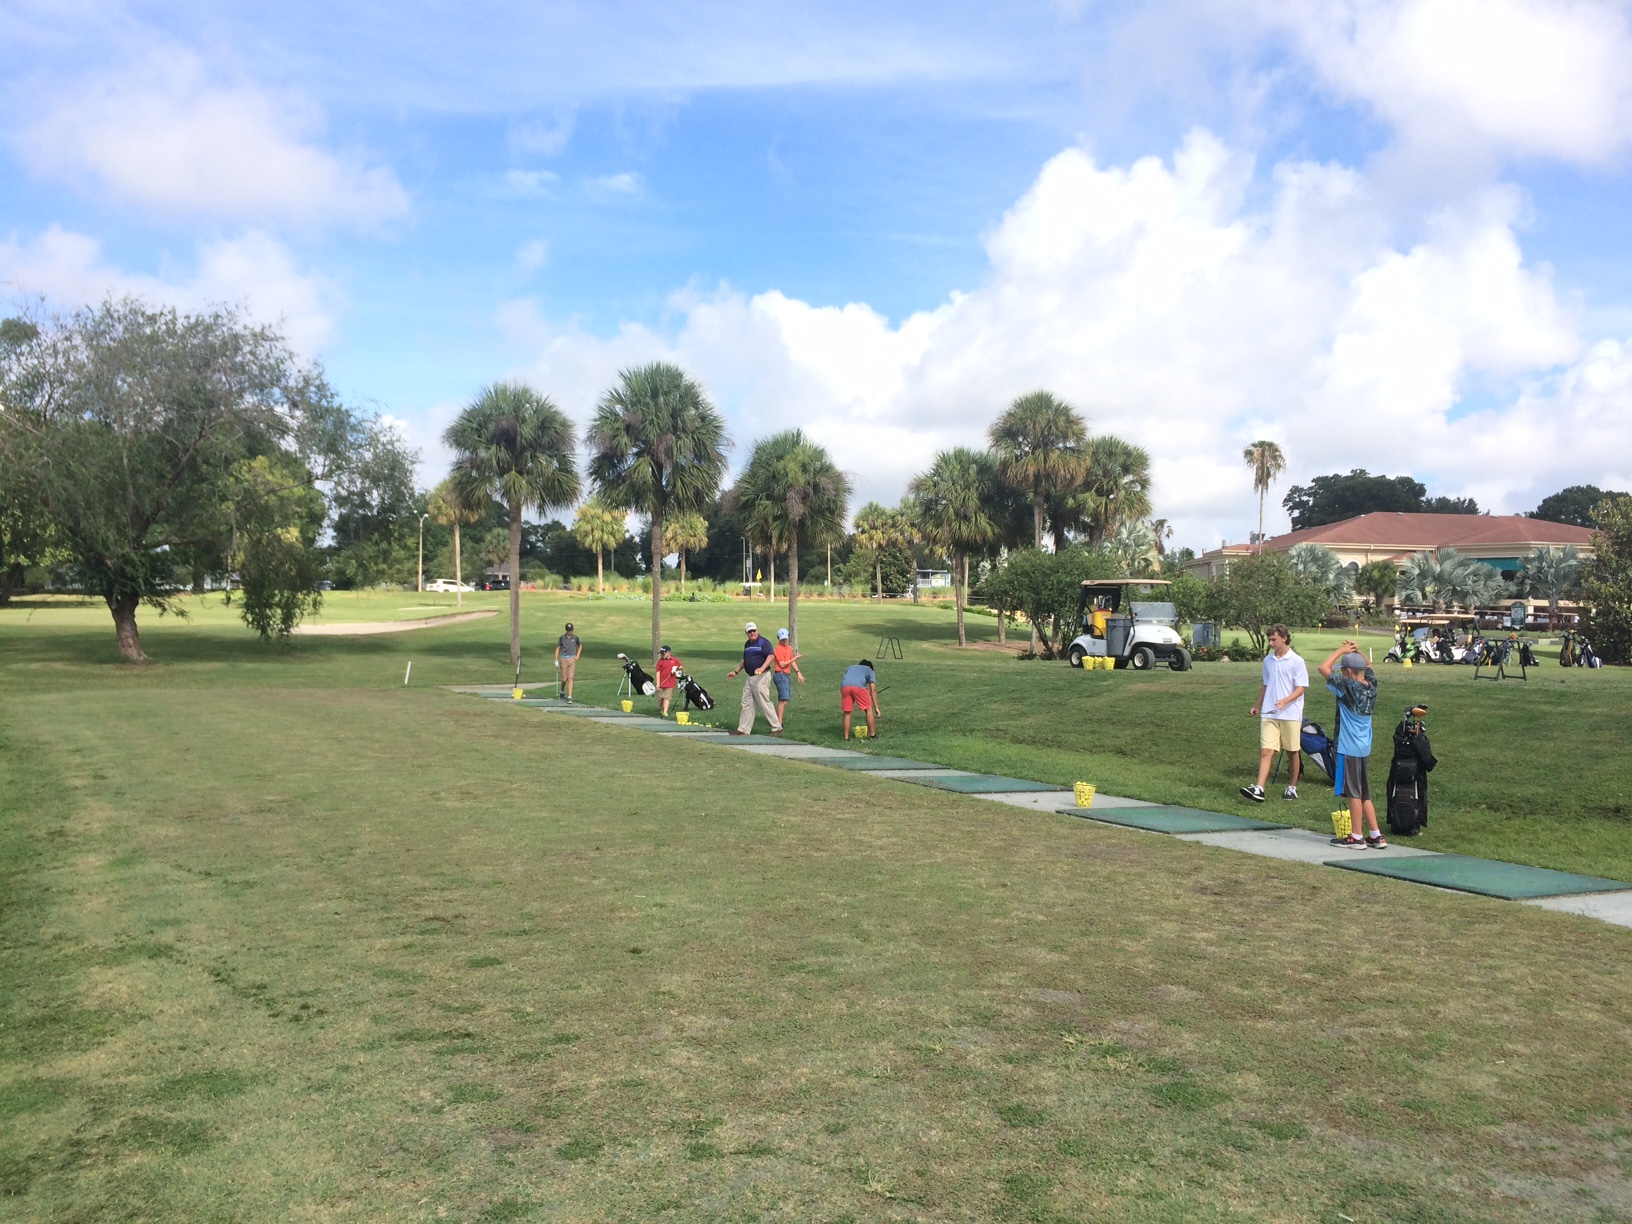 Junior Citrus League Golfers teeing off at Cleveland Heights Golf Course on a sunny day, with instructors